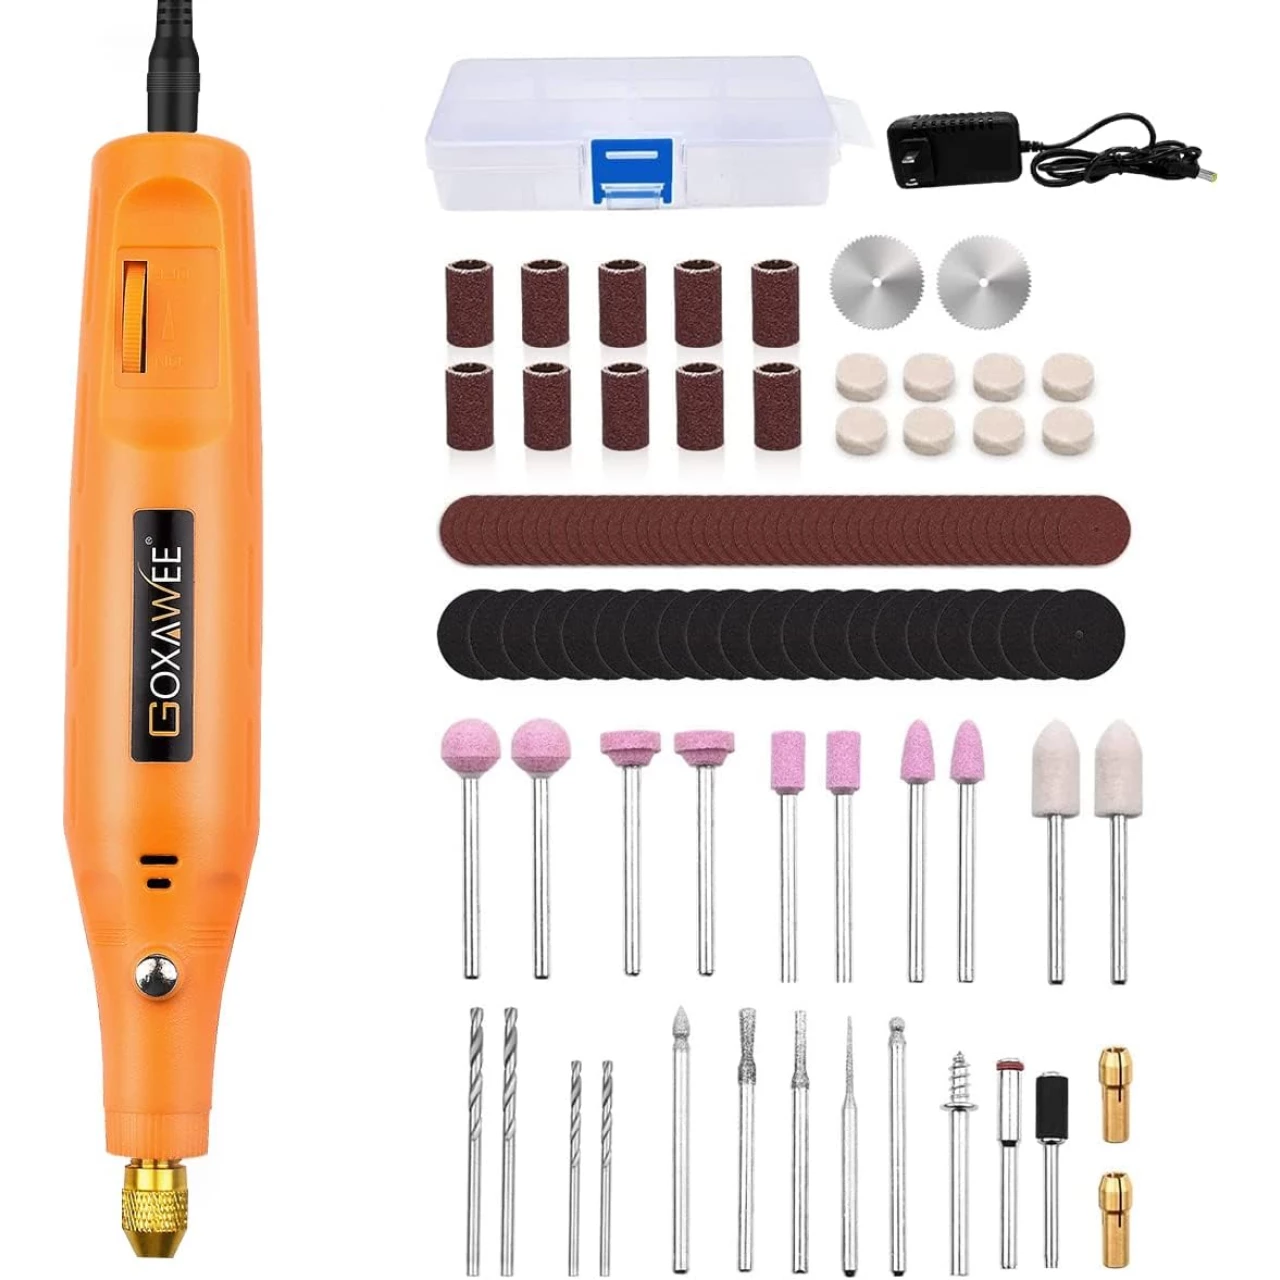 GOXAWEE 24V Mini Rotary Tool, Corded Rotary Tool with 105pcs Accessories, 18000rpm Multi-Purpose Power Rotary Tool for Handmade Crafting and DIY Creations.(Vibrant Orange)